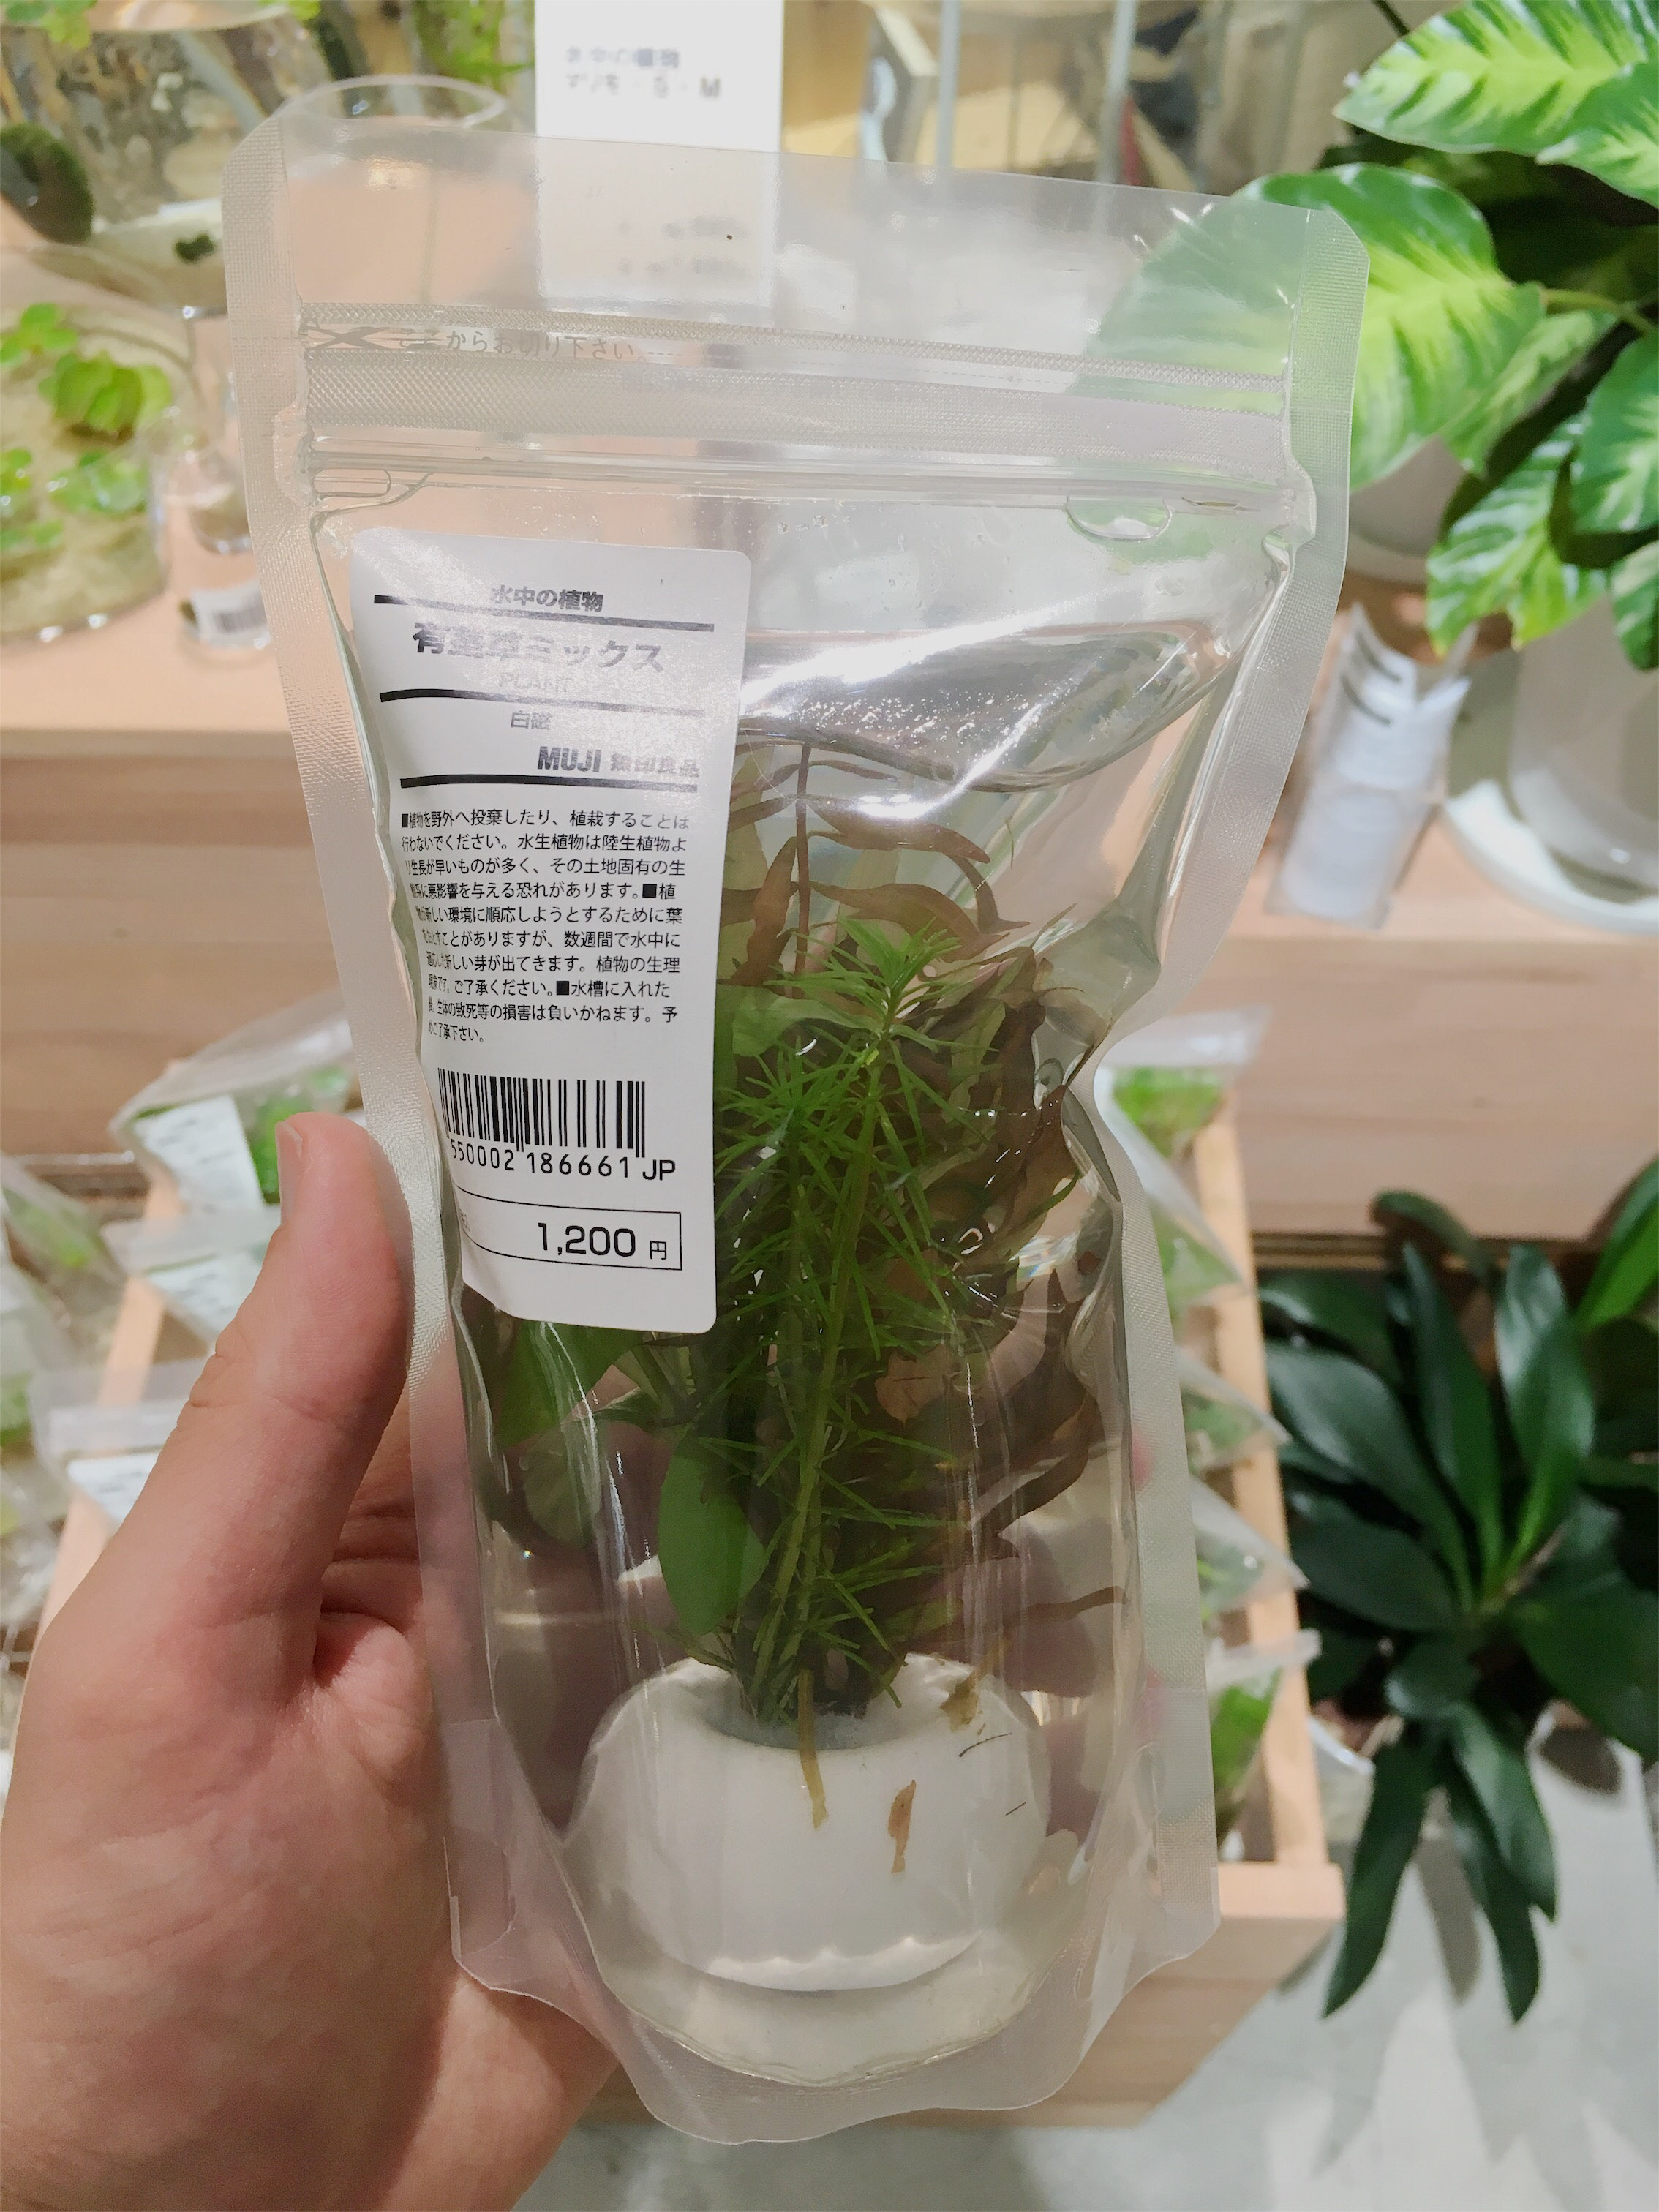 Submerged plant at MUJI in Ginza